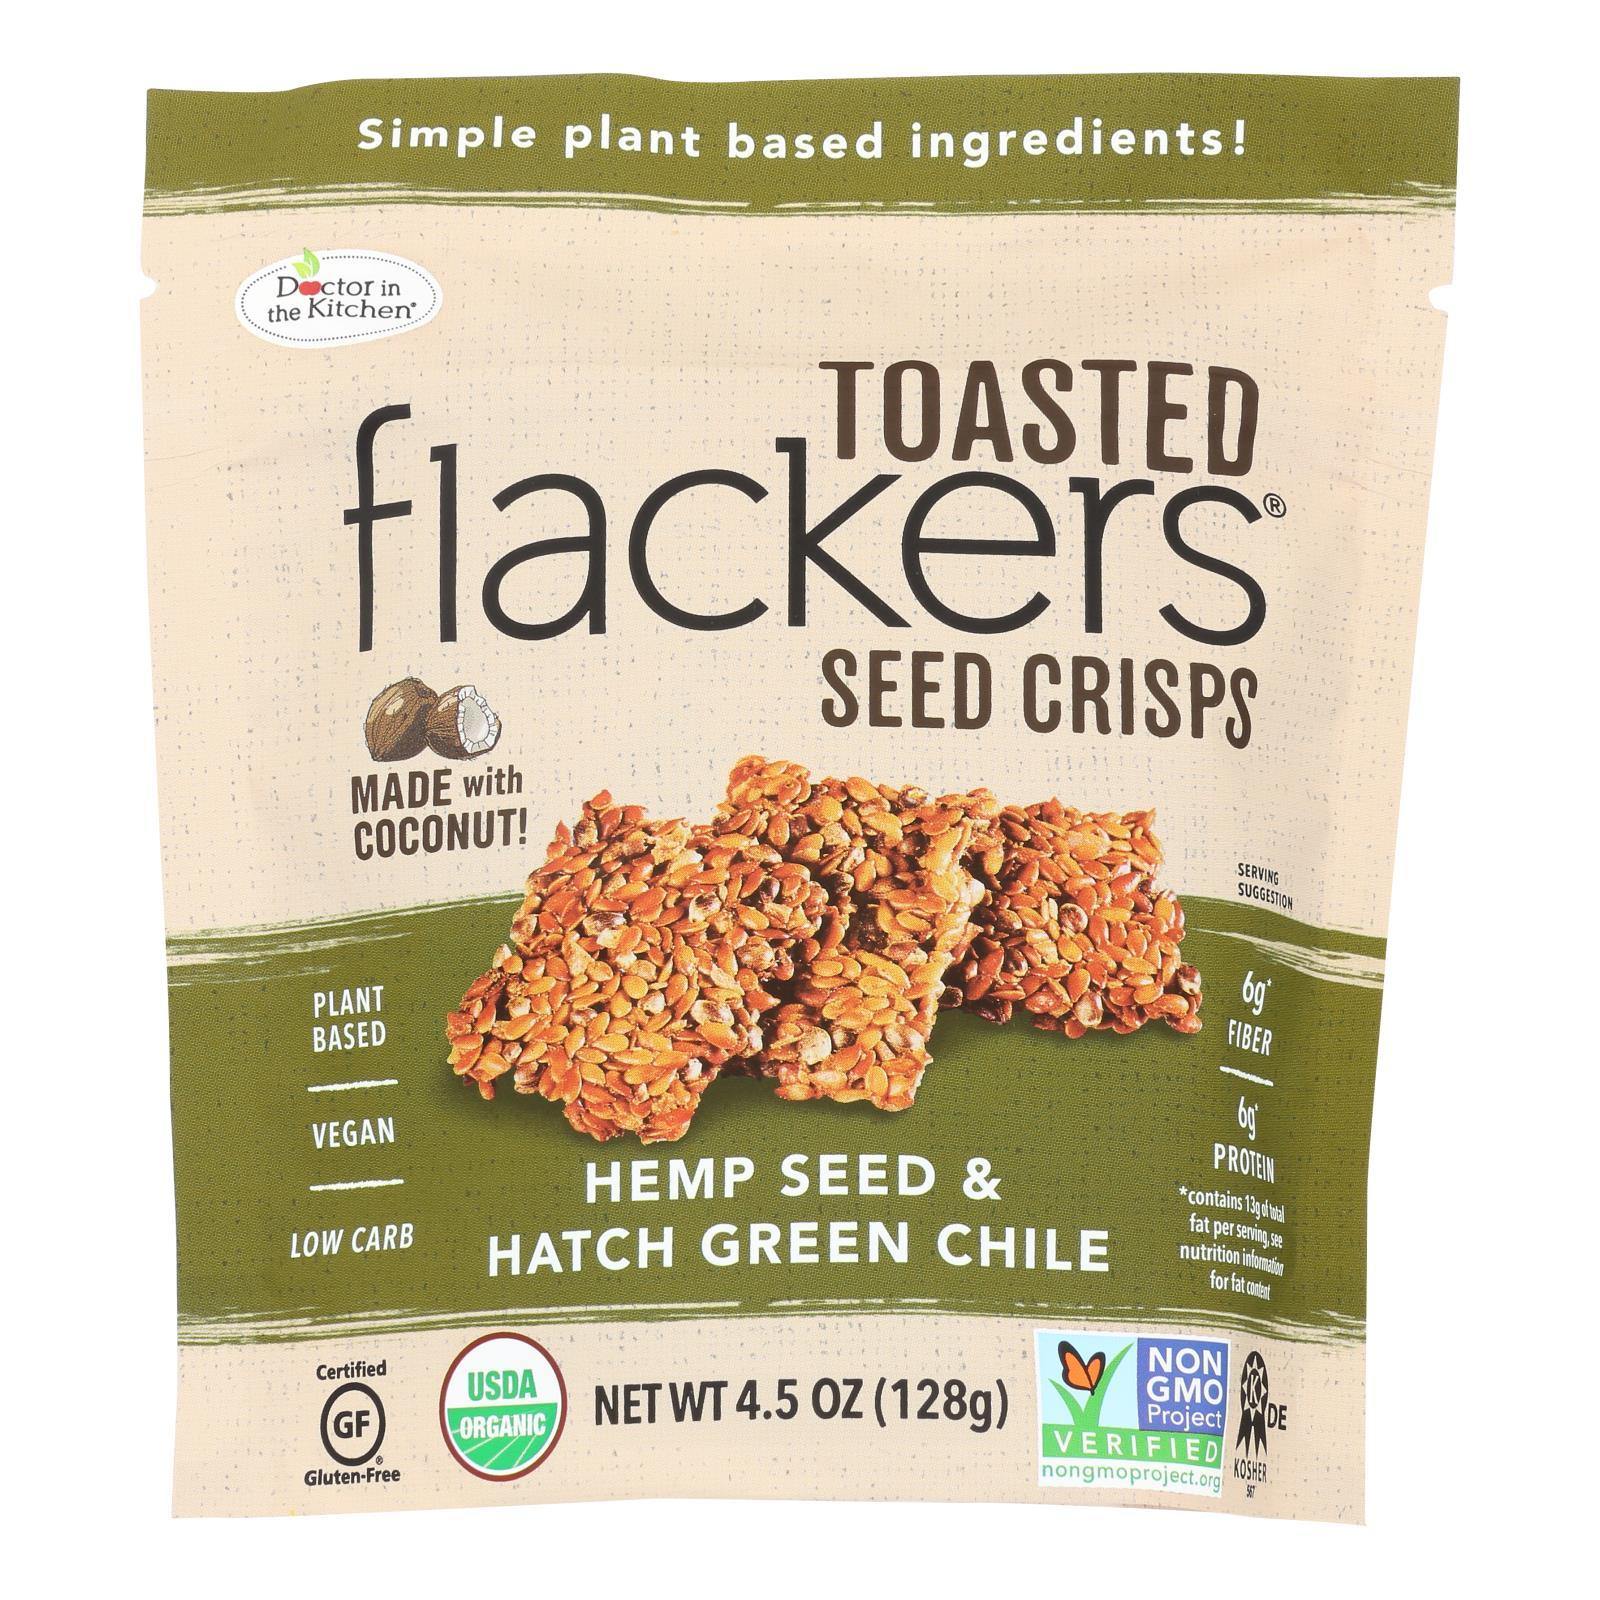 Doctor in the Kitchen - Toasted Flackers Seed Crisps Hemp Seed & Hatch Green Chile